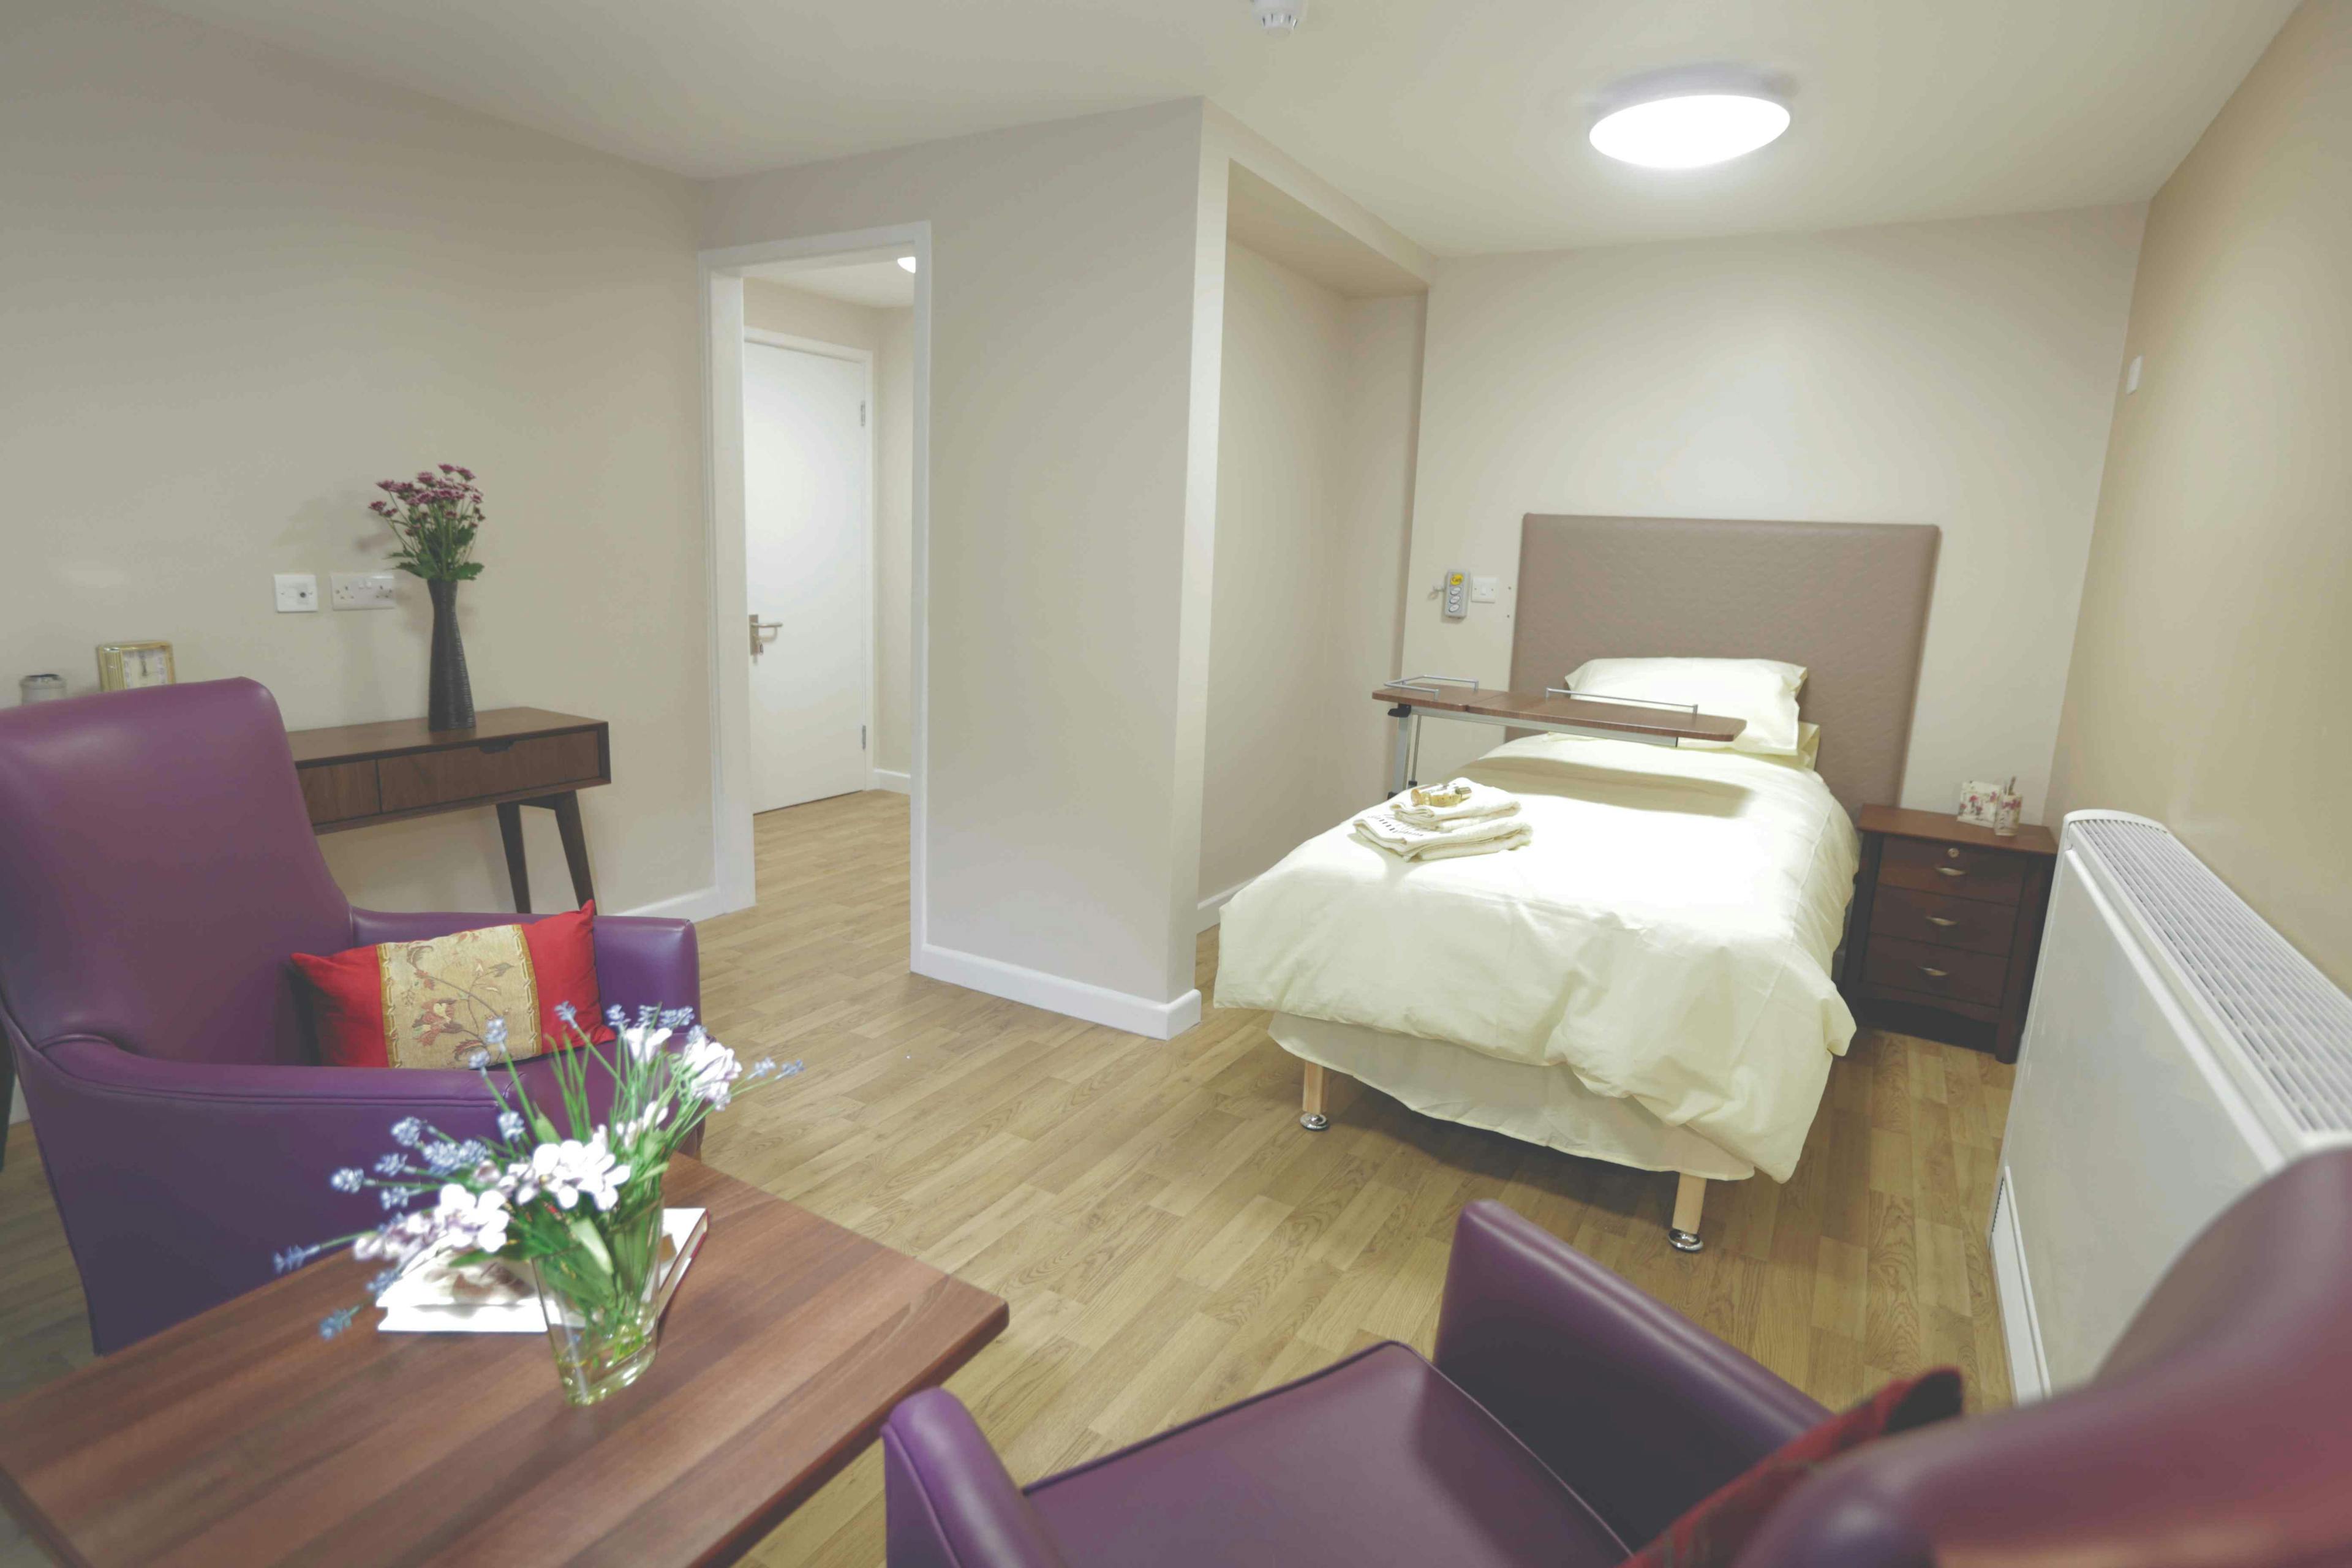 Minster Care Group - Turnpike Court care home 9